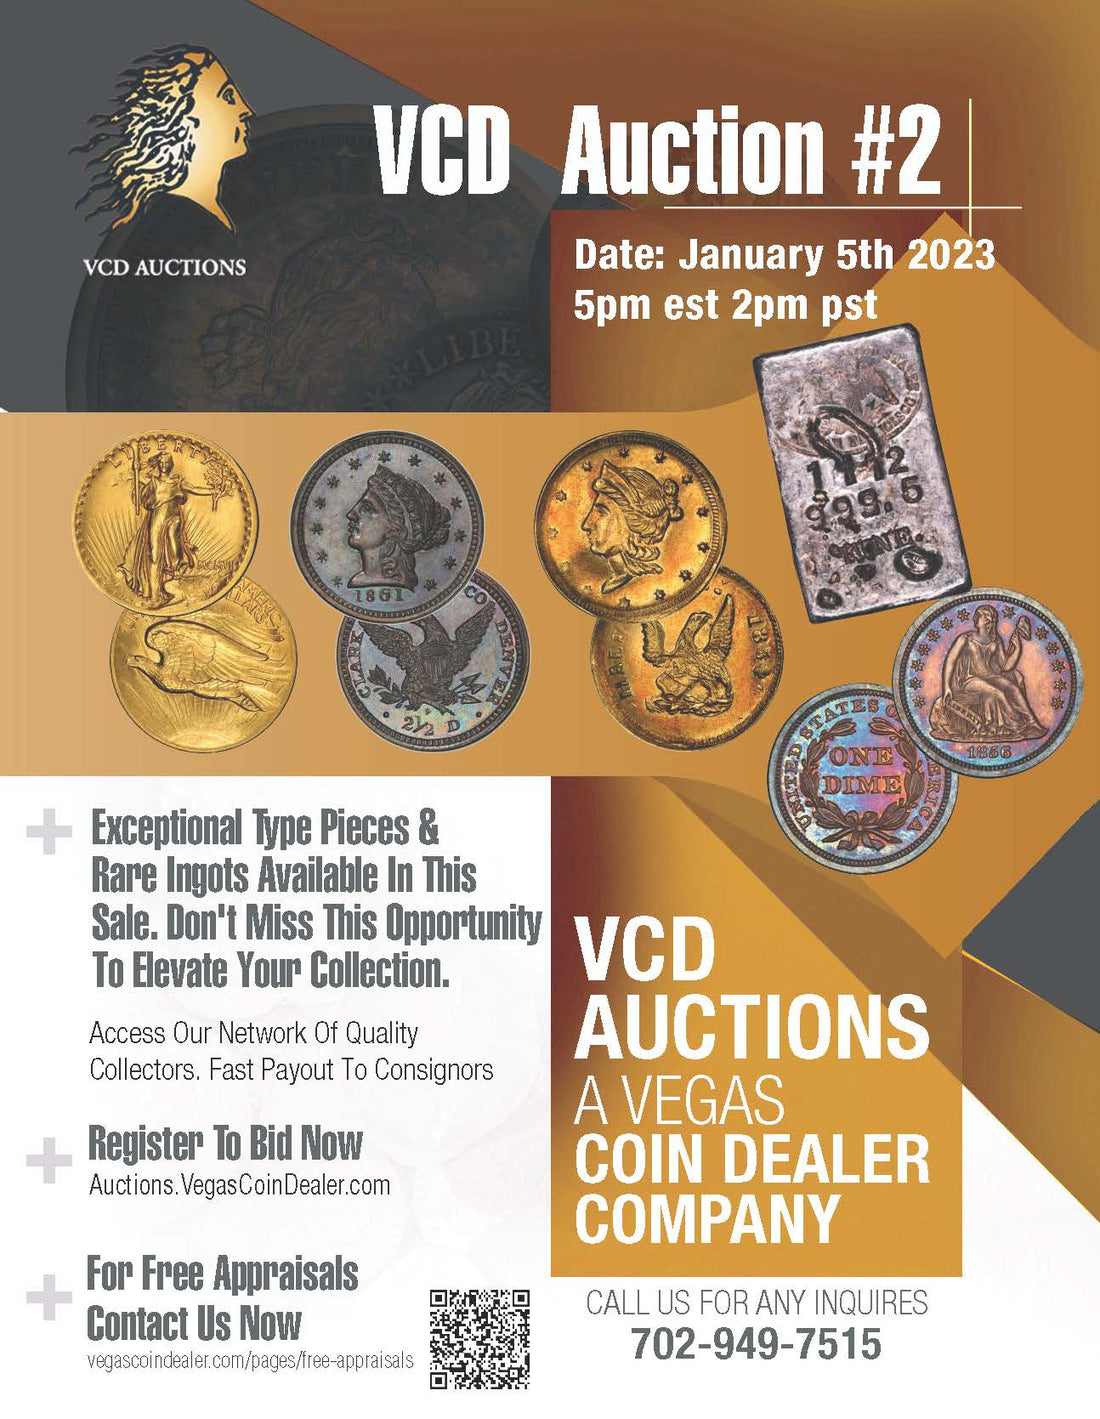 VCD Auctions is having a second sale?